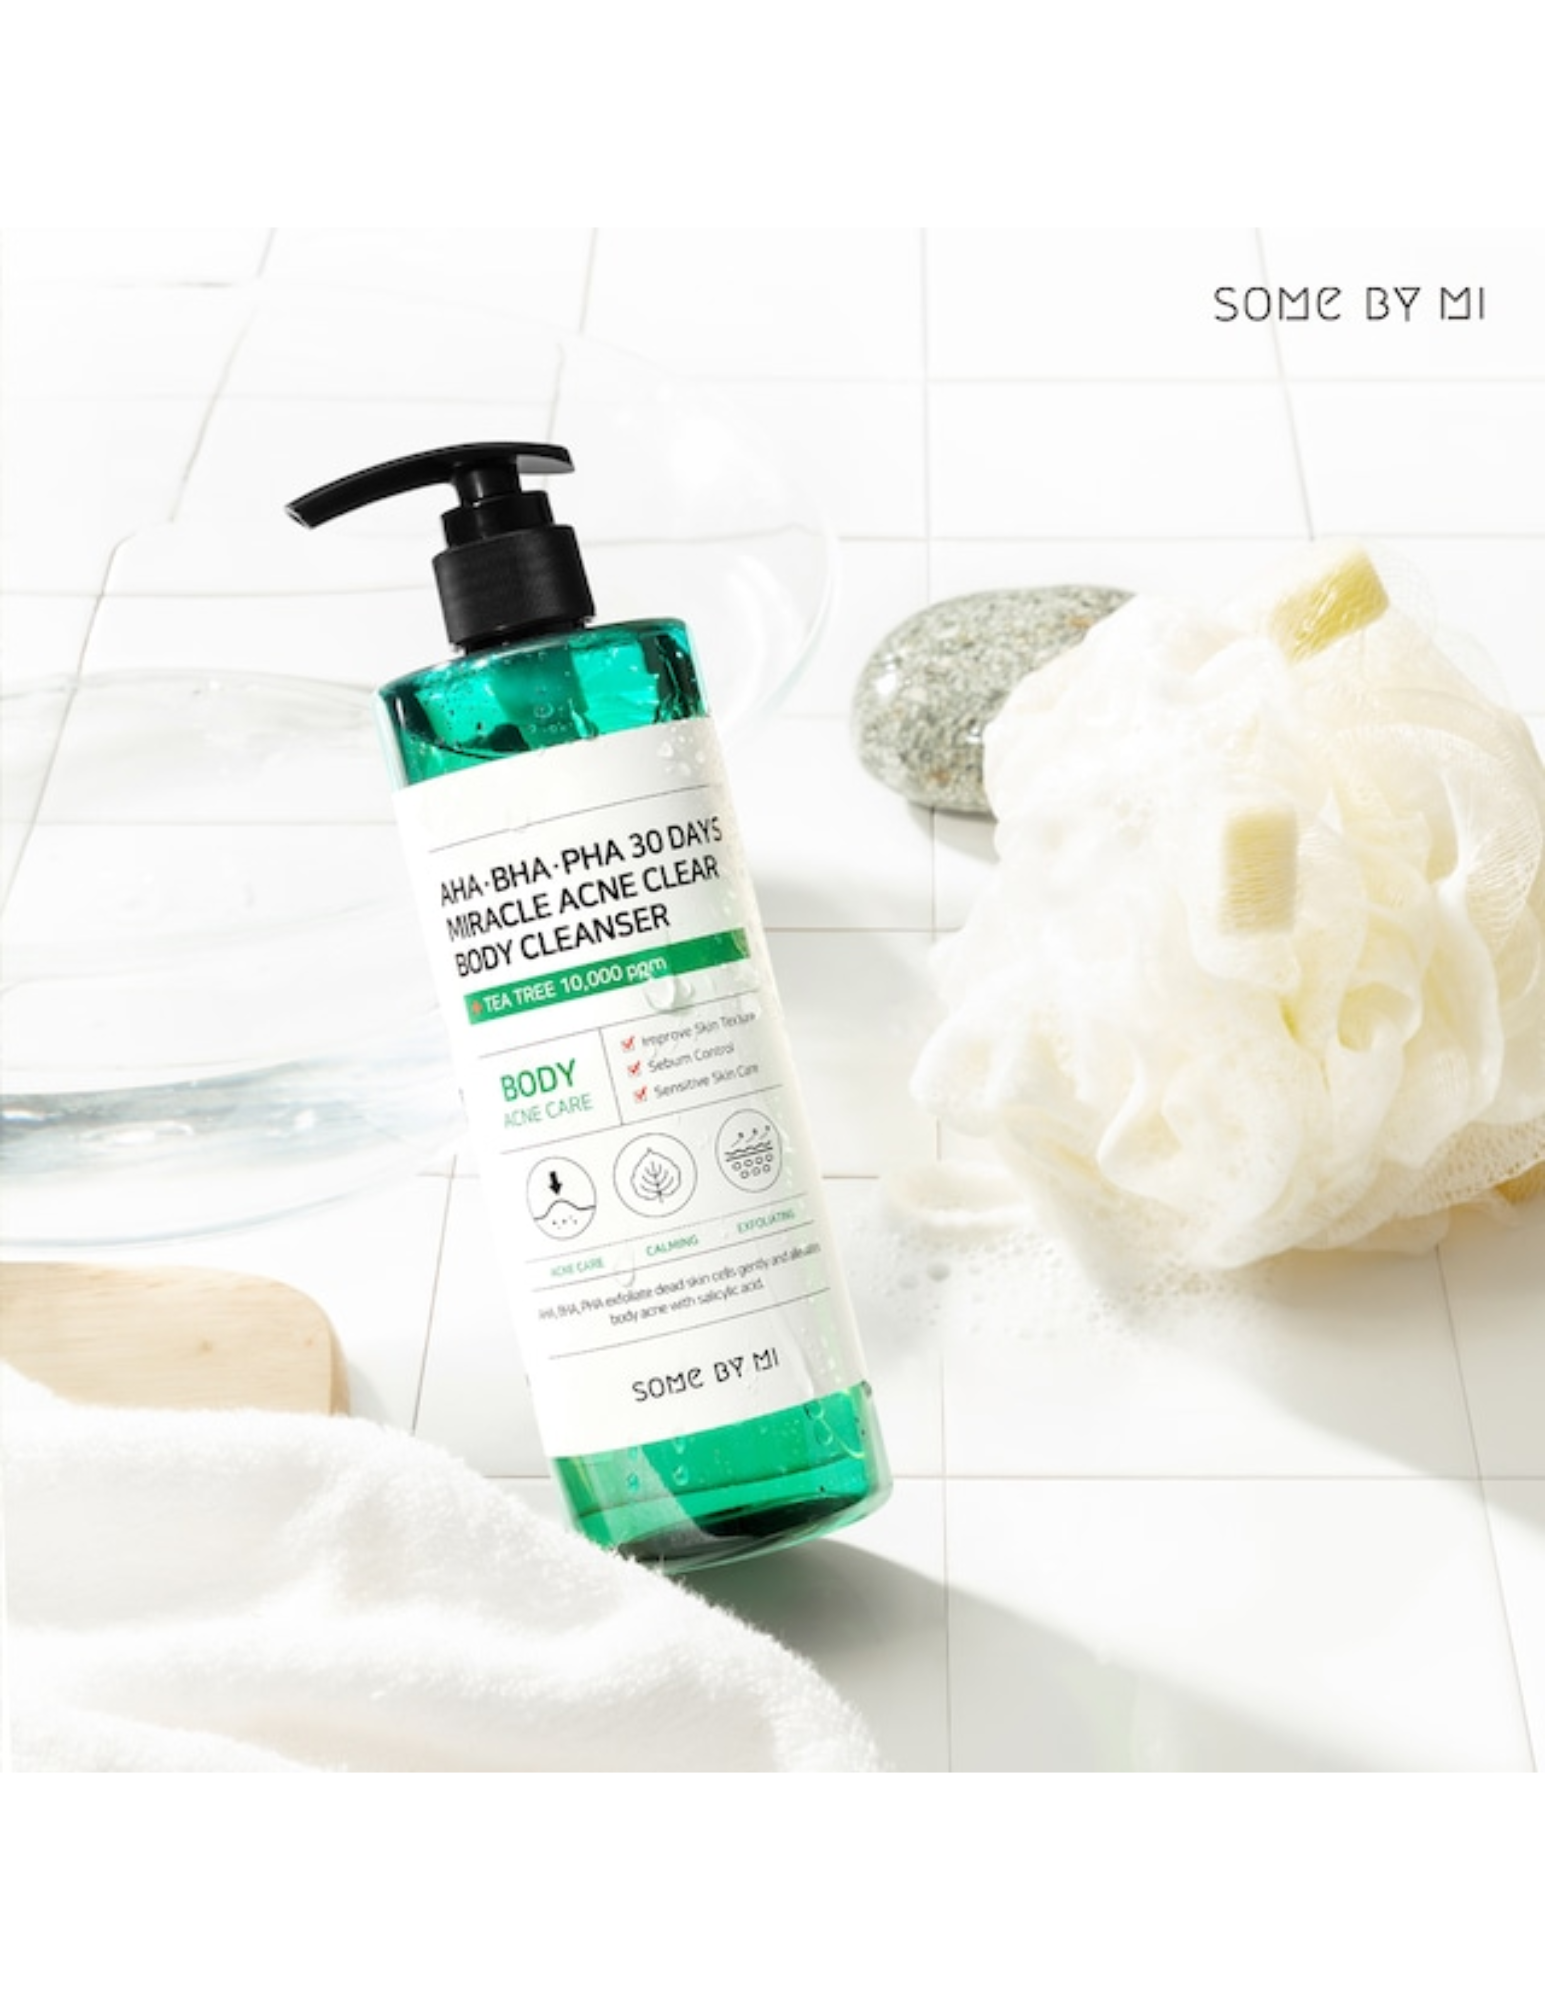 SOME BY MI AHA BHA PHA 30 Days Miracle Acne Clear Body Cleanser